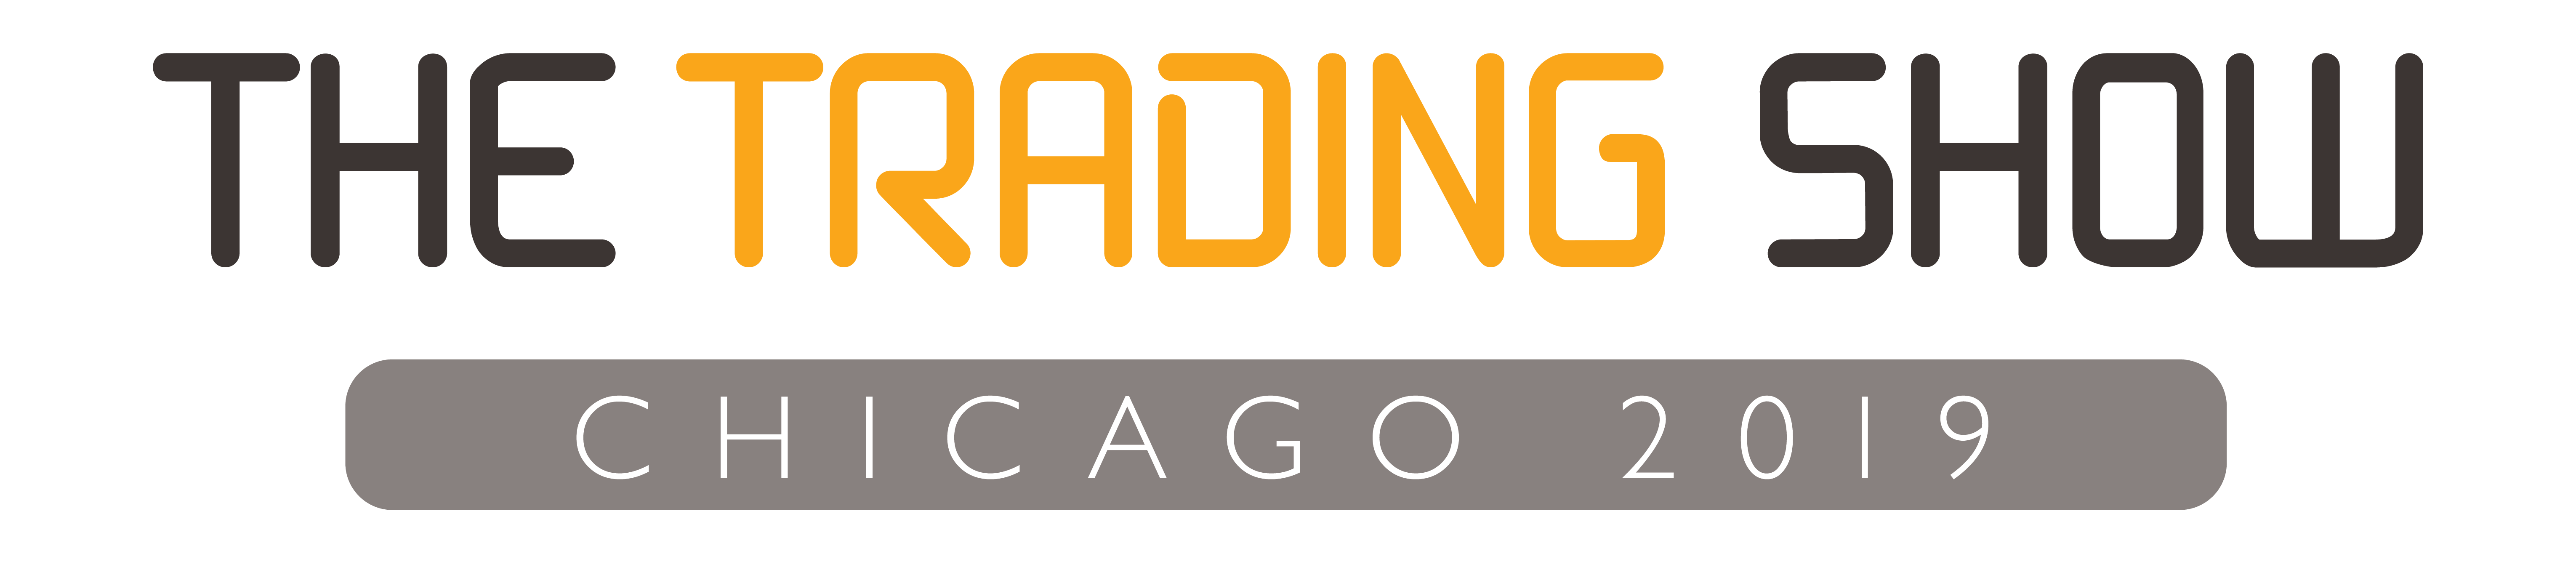 The Trading Show Chicago 2019 organized by Terrapinn